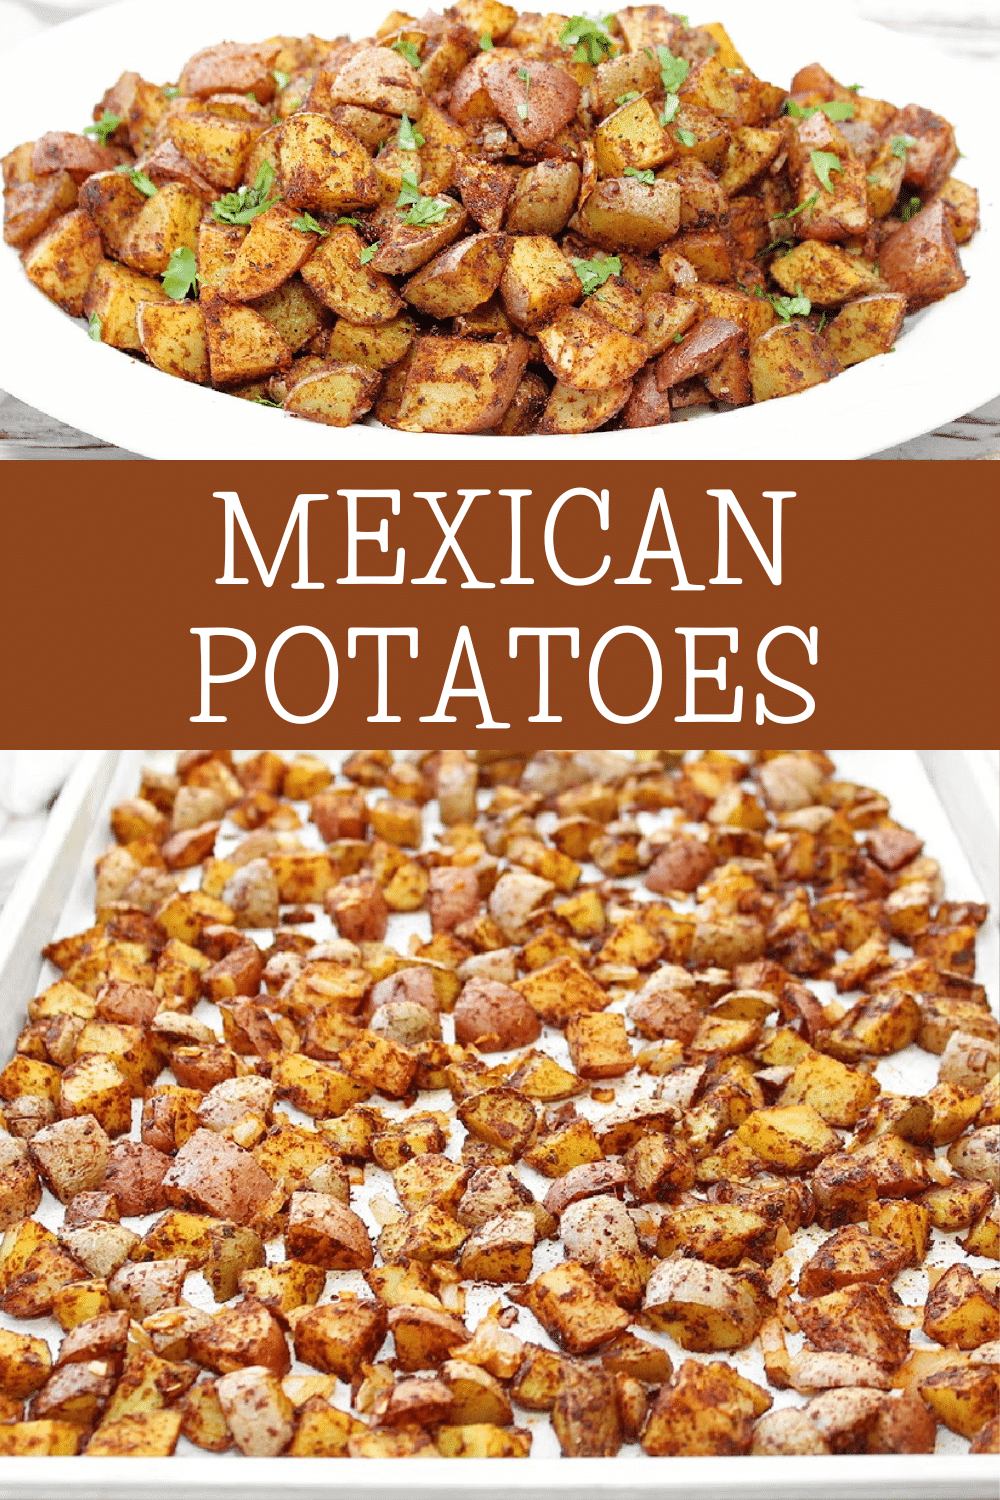 Mexican Potatoes ~ An easy, budget-friendly side dish of crisp roasted potatoes seasoned with a savory blend of spices.  via @thiswifecooks